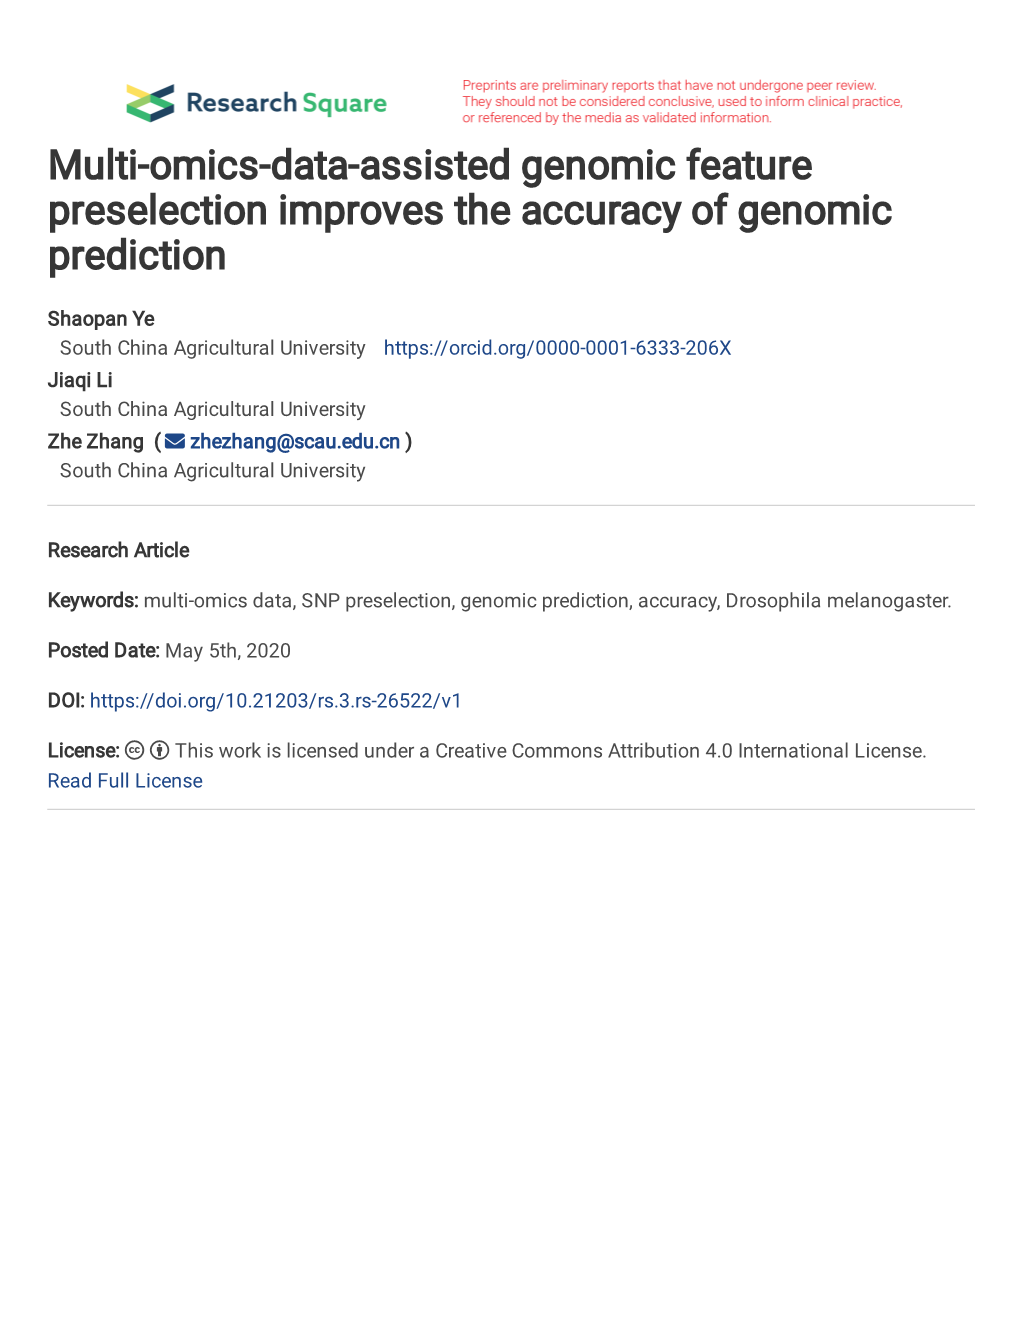 Multi-Omics-Data-Assisted Genomic Feature Preselection Improves the Accuracy of Genomic Prediction